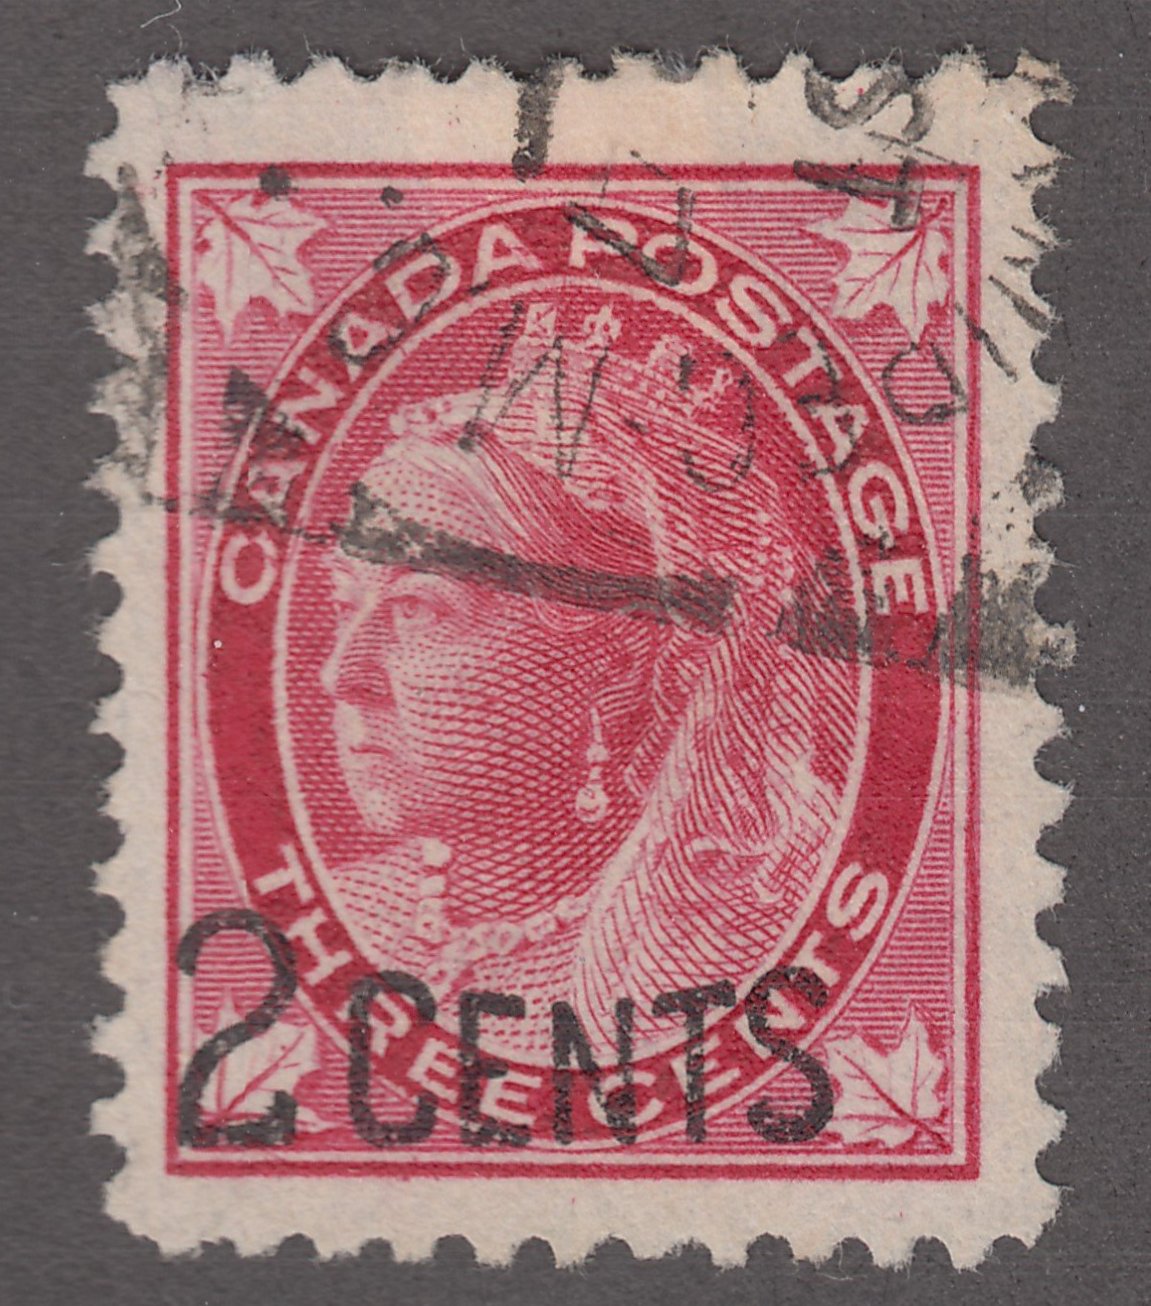 0087CA1807 - Canada #87 - Used - Unlisted Major Re-entry